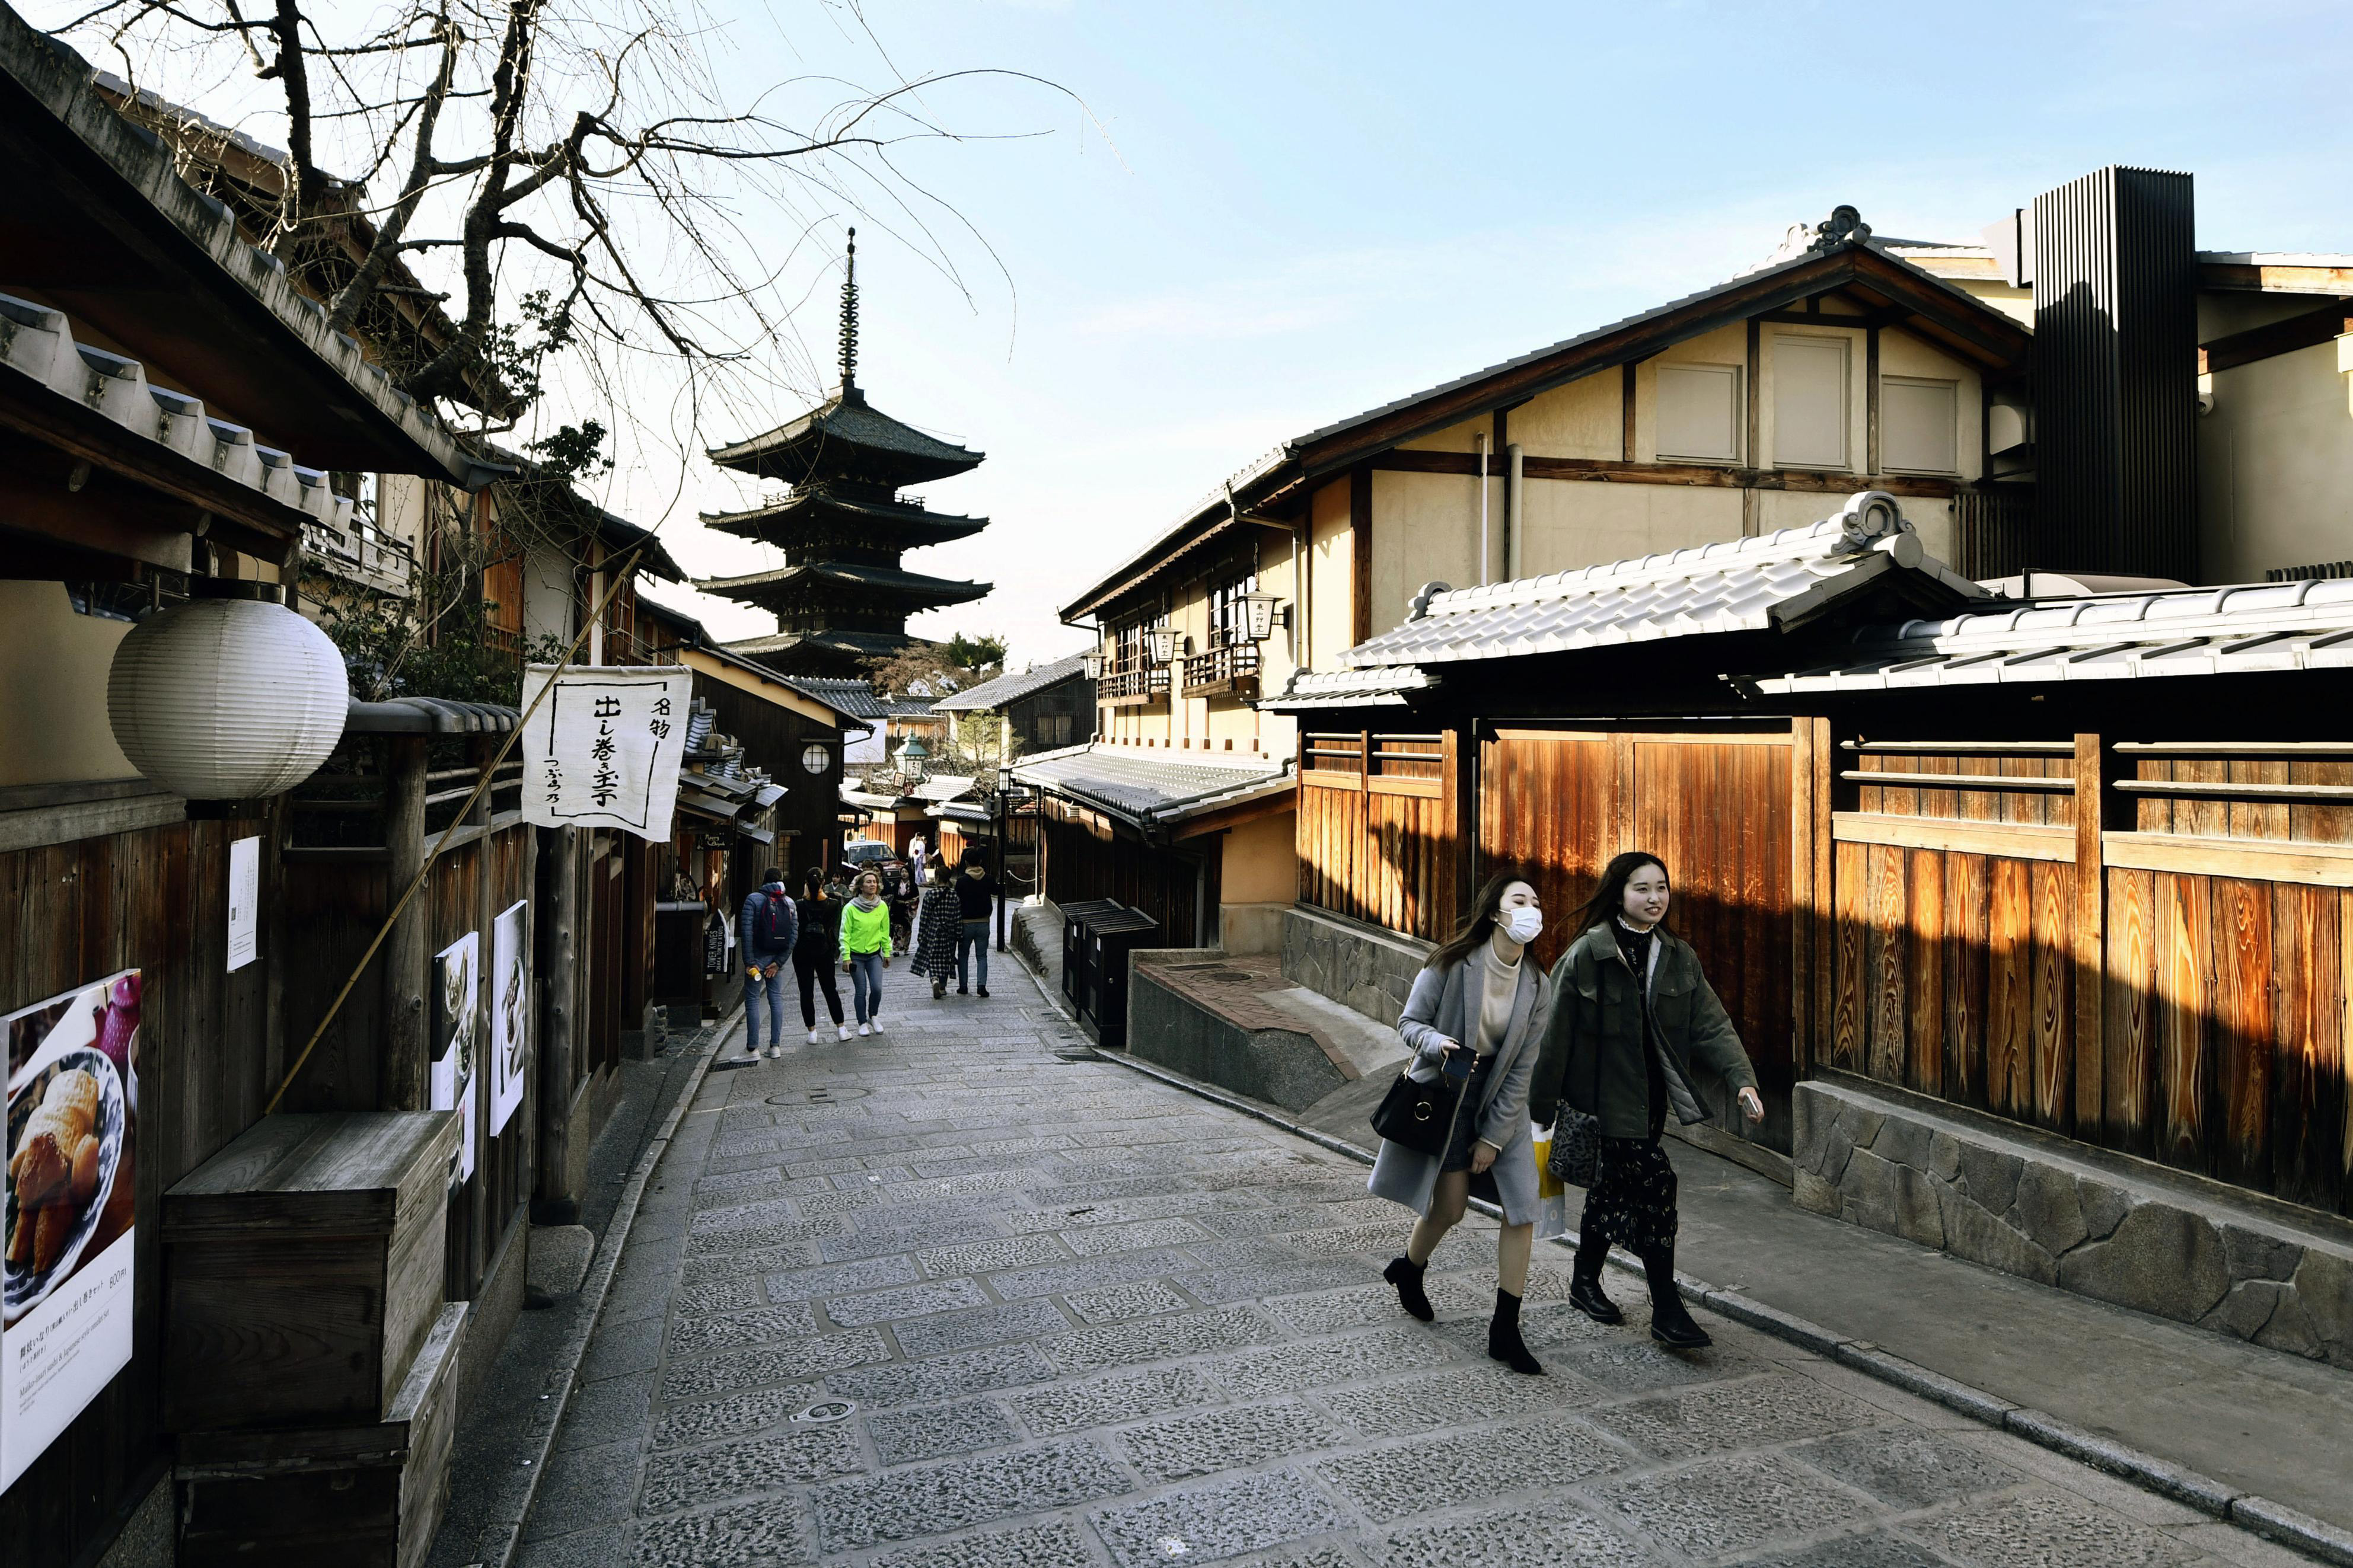 A small number of tourists are seen on a street in historic Kyoto. | KYODO